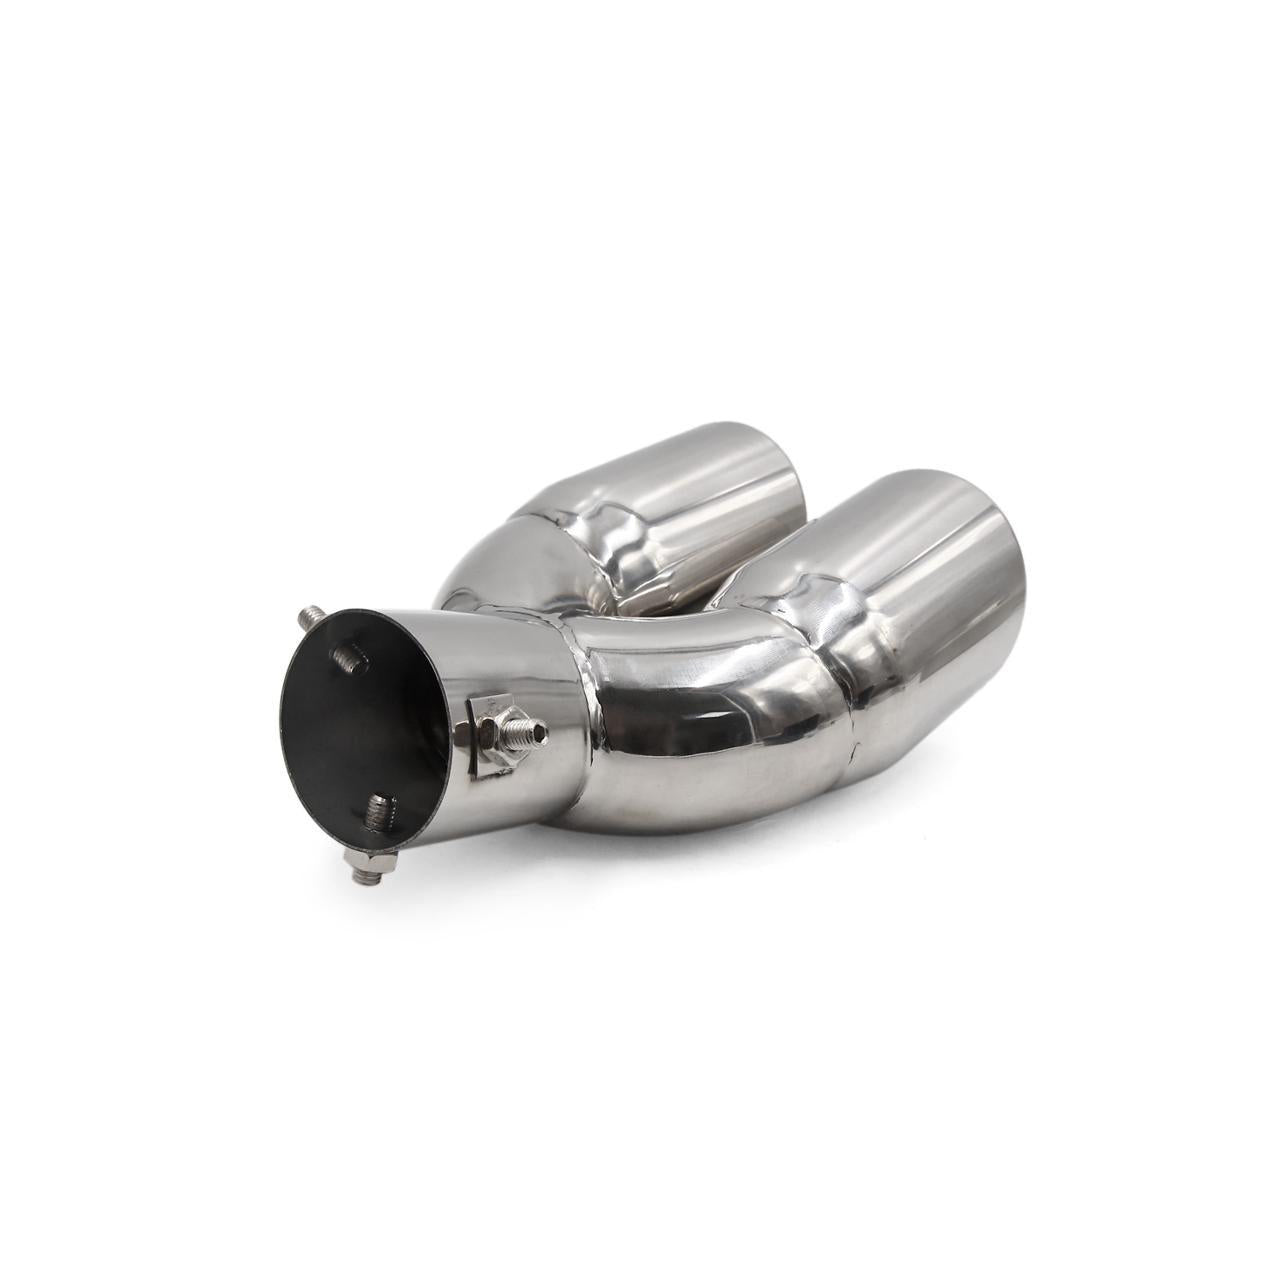 Oshotto Stainless Steel Dual Pipe SS-011 Car Exhaust Muffler Silencer Cover Universal for All Cars (Chrome)